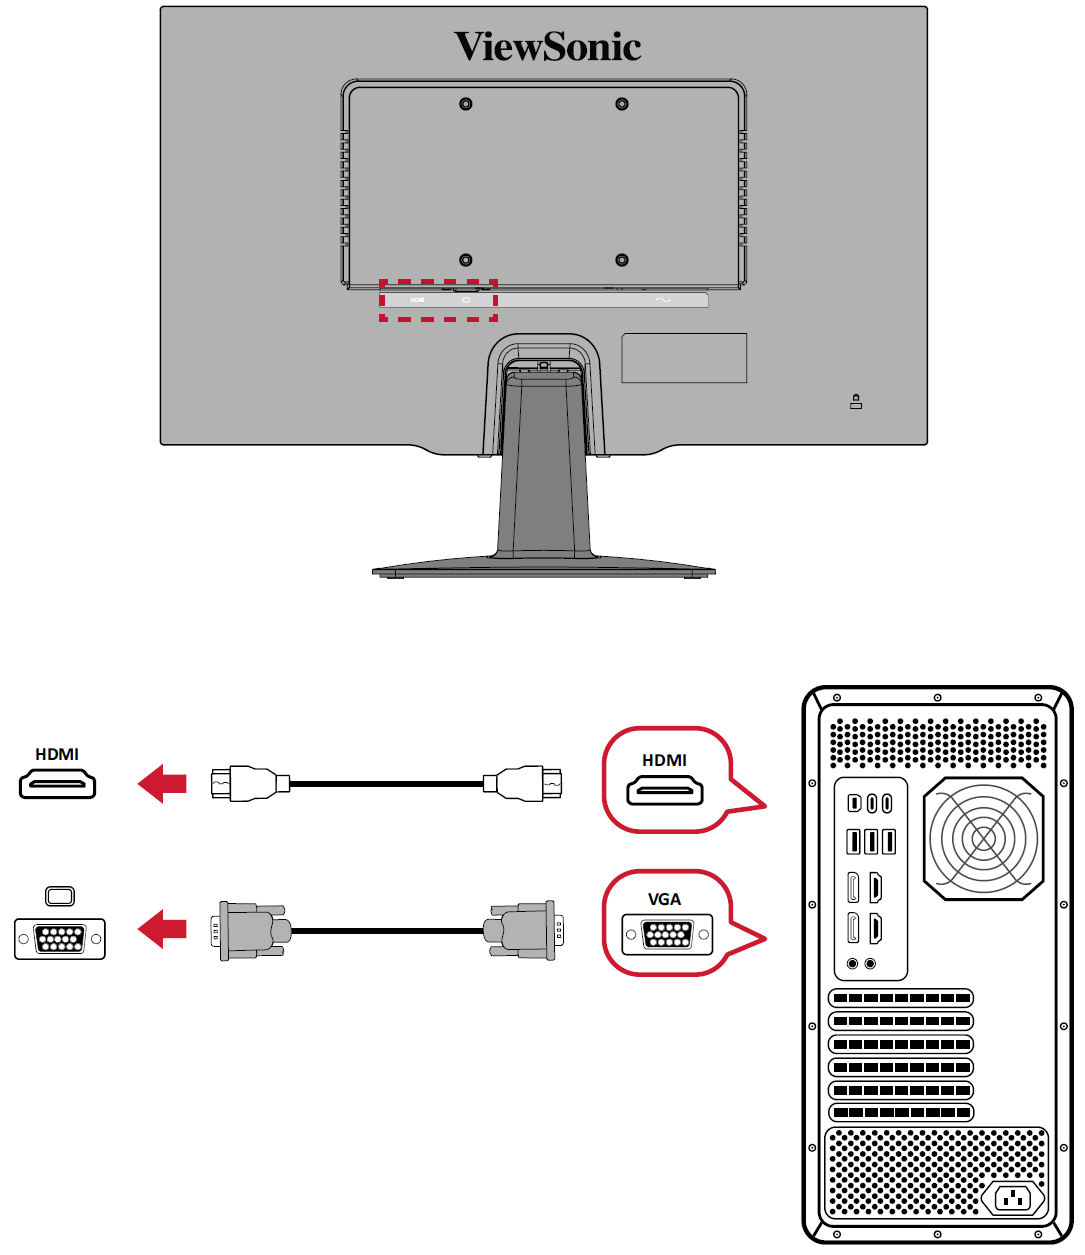 File:VA2233-H Connecting Devices.PNG